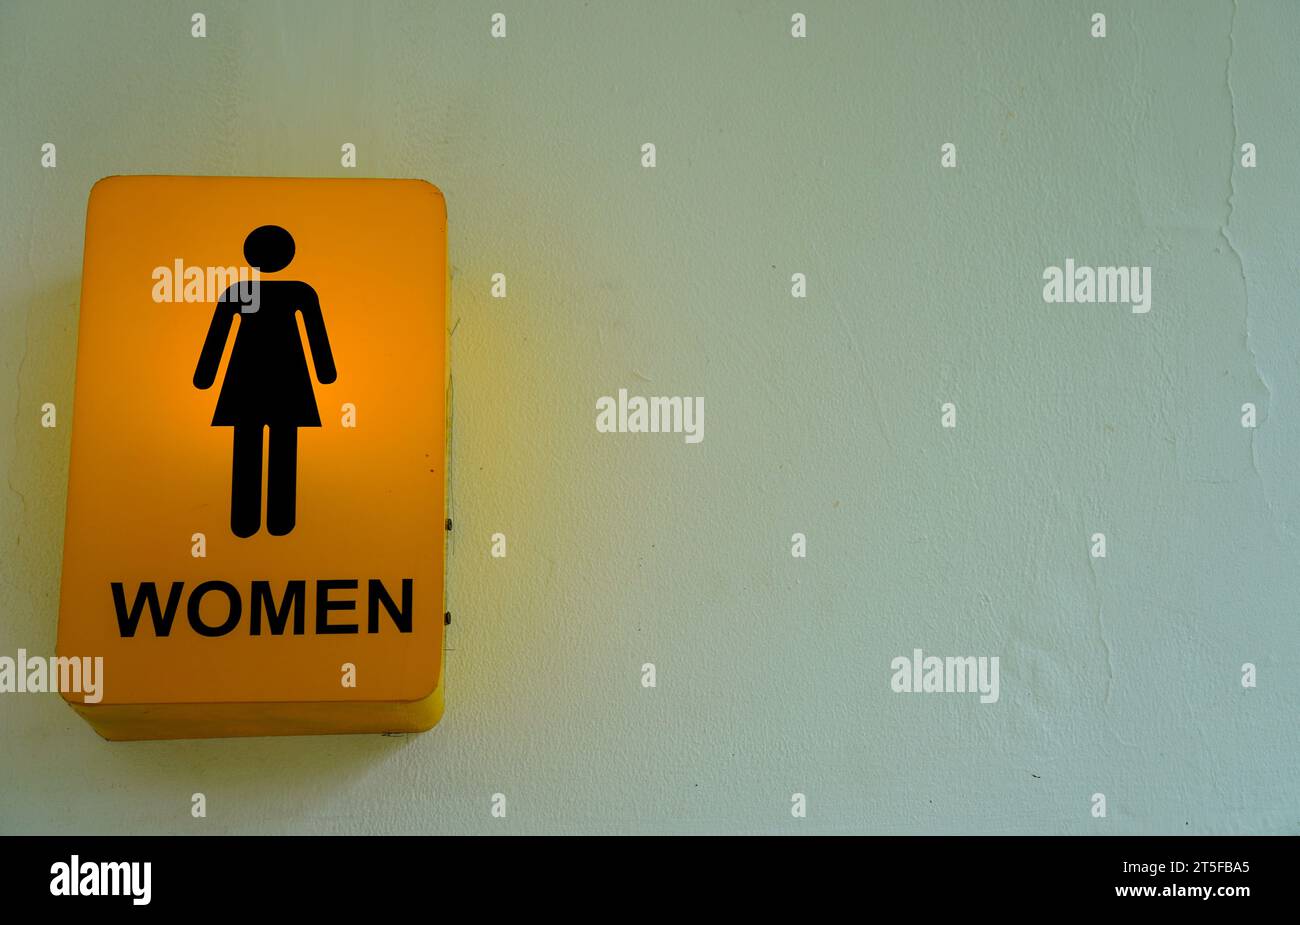 The female gender sign in close-up, adorning a clean white wall with minimalist elegance Stock Photo